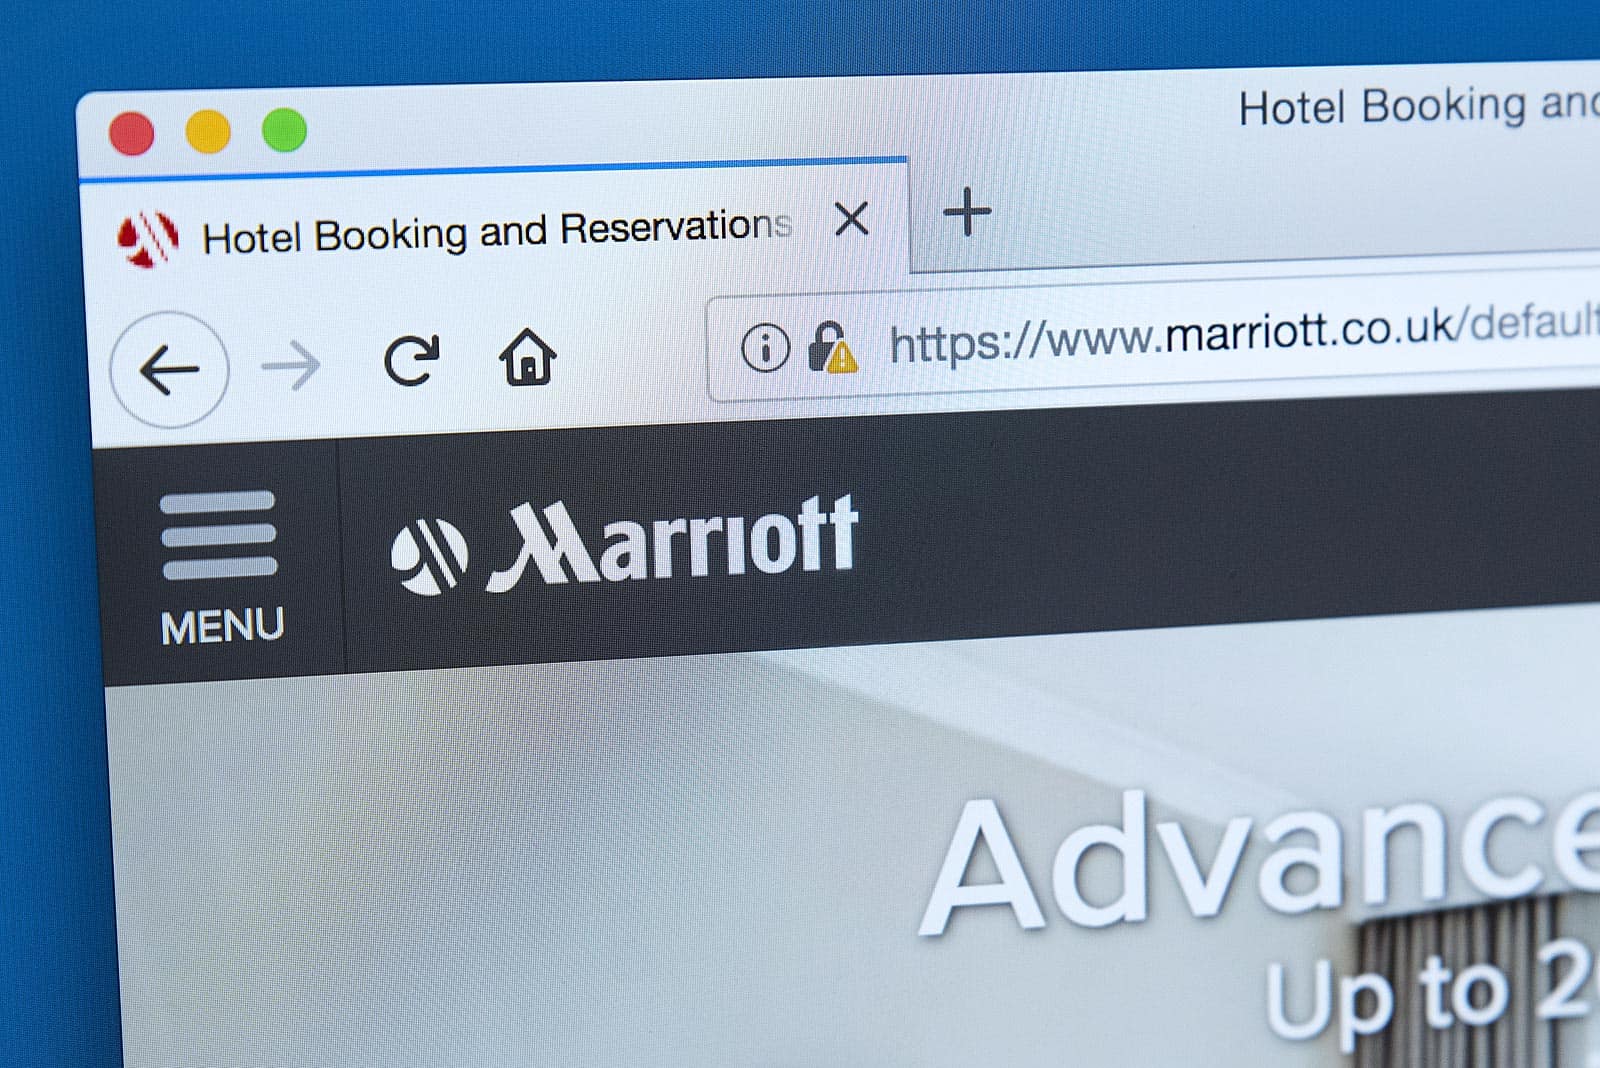 deceiving-resort-fees-by-marriott-hotels-online-booking-system-is-a-hot-topic-by-washington-dc-attorney-general-karl-racine